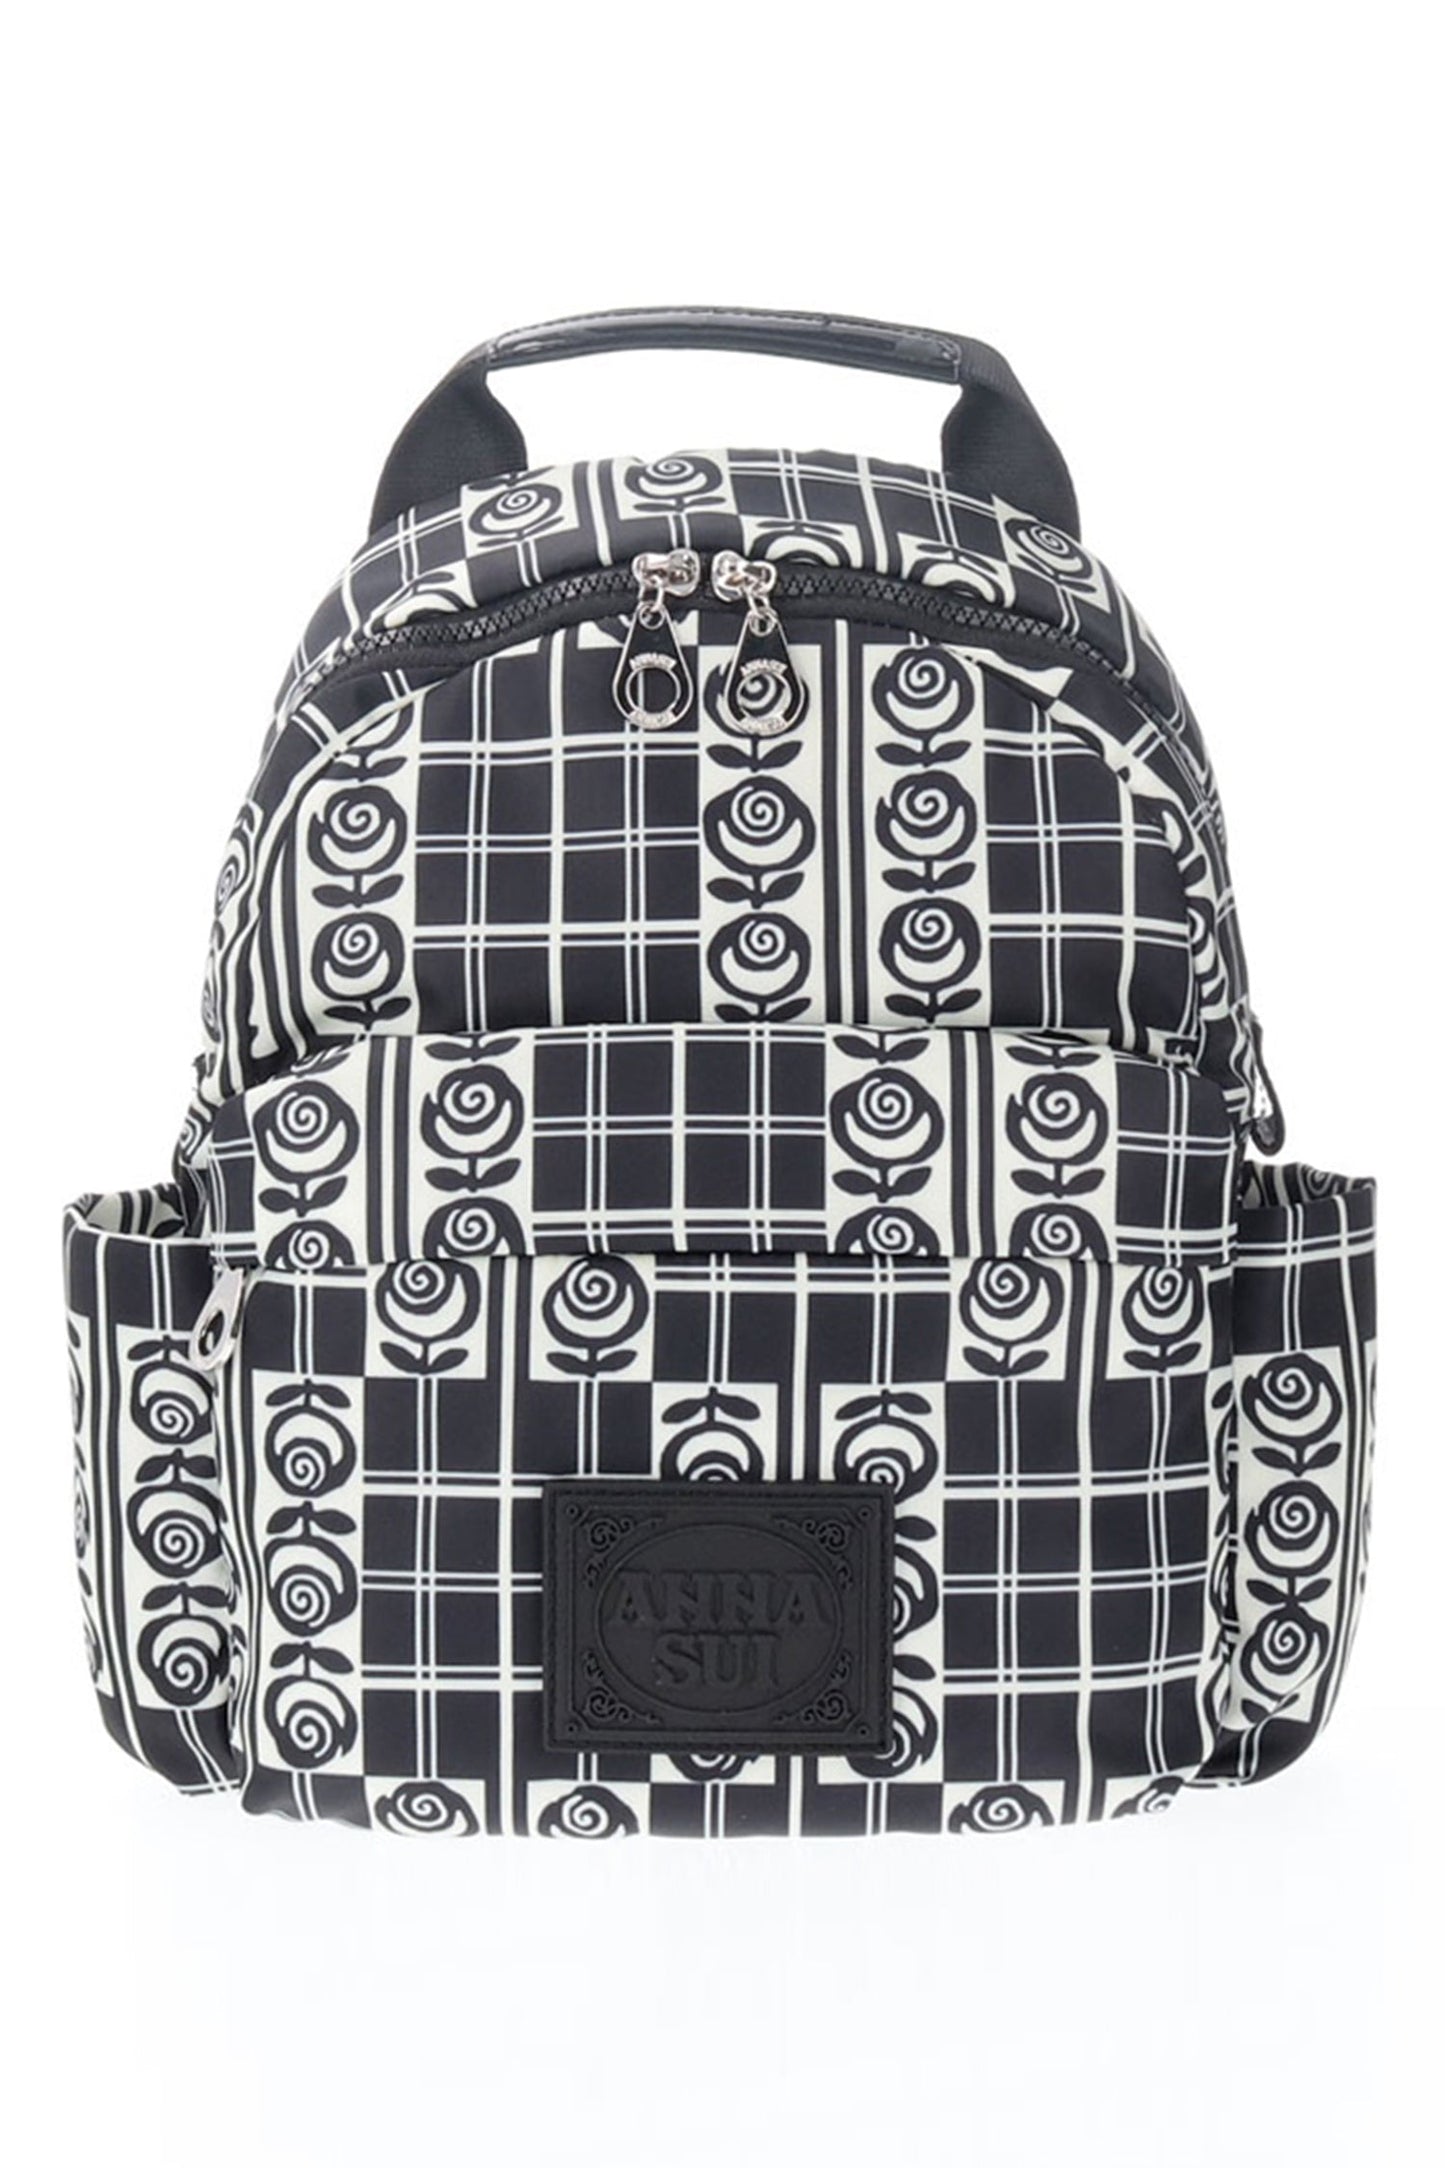 Backpack, handle on top, 2-straps, design of BW roses, and BW trellis, zipper pocket on the back